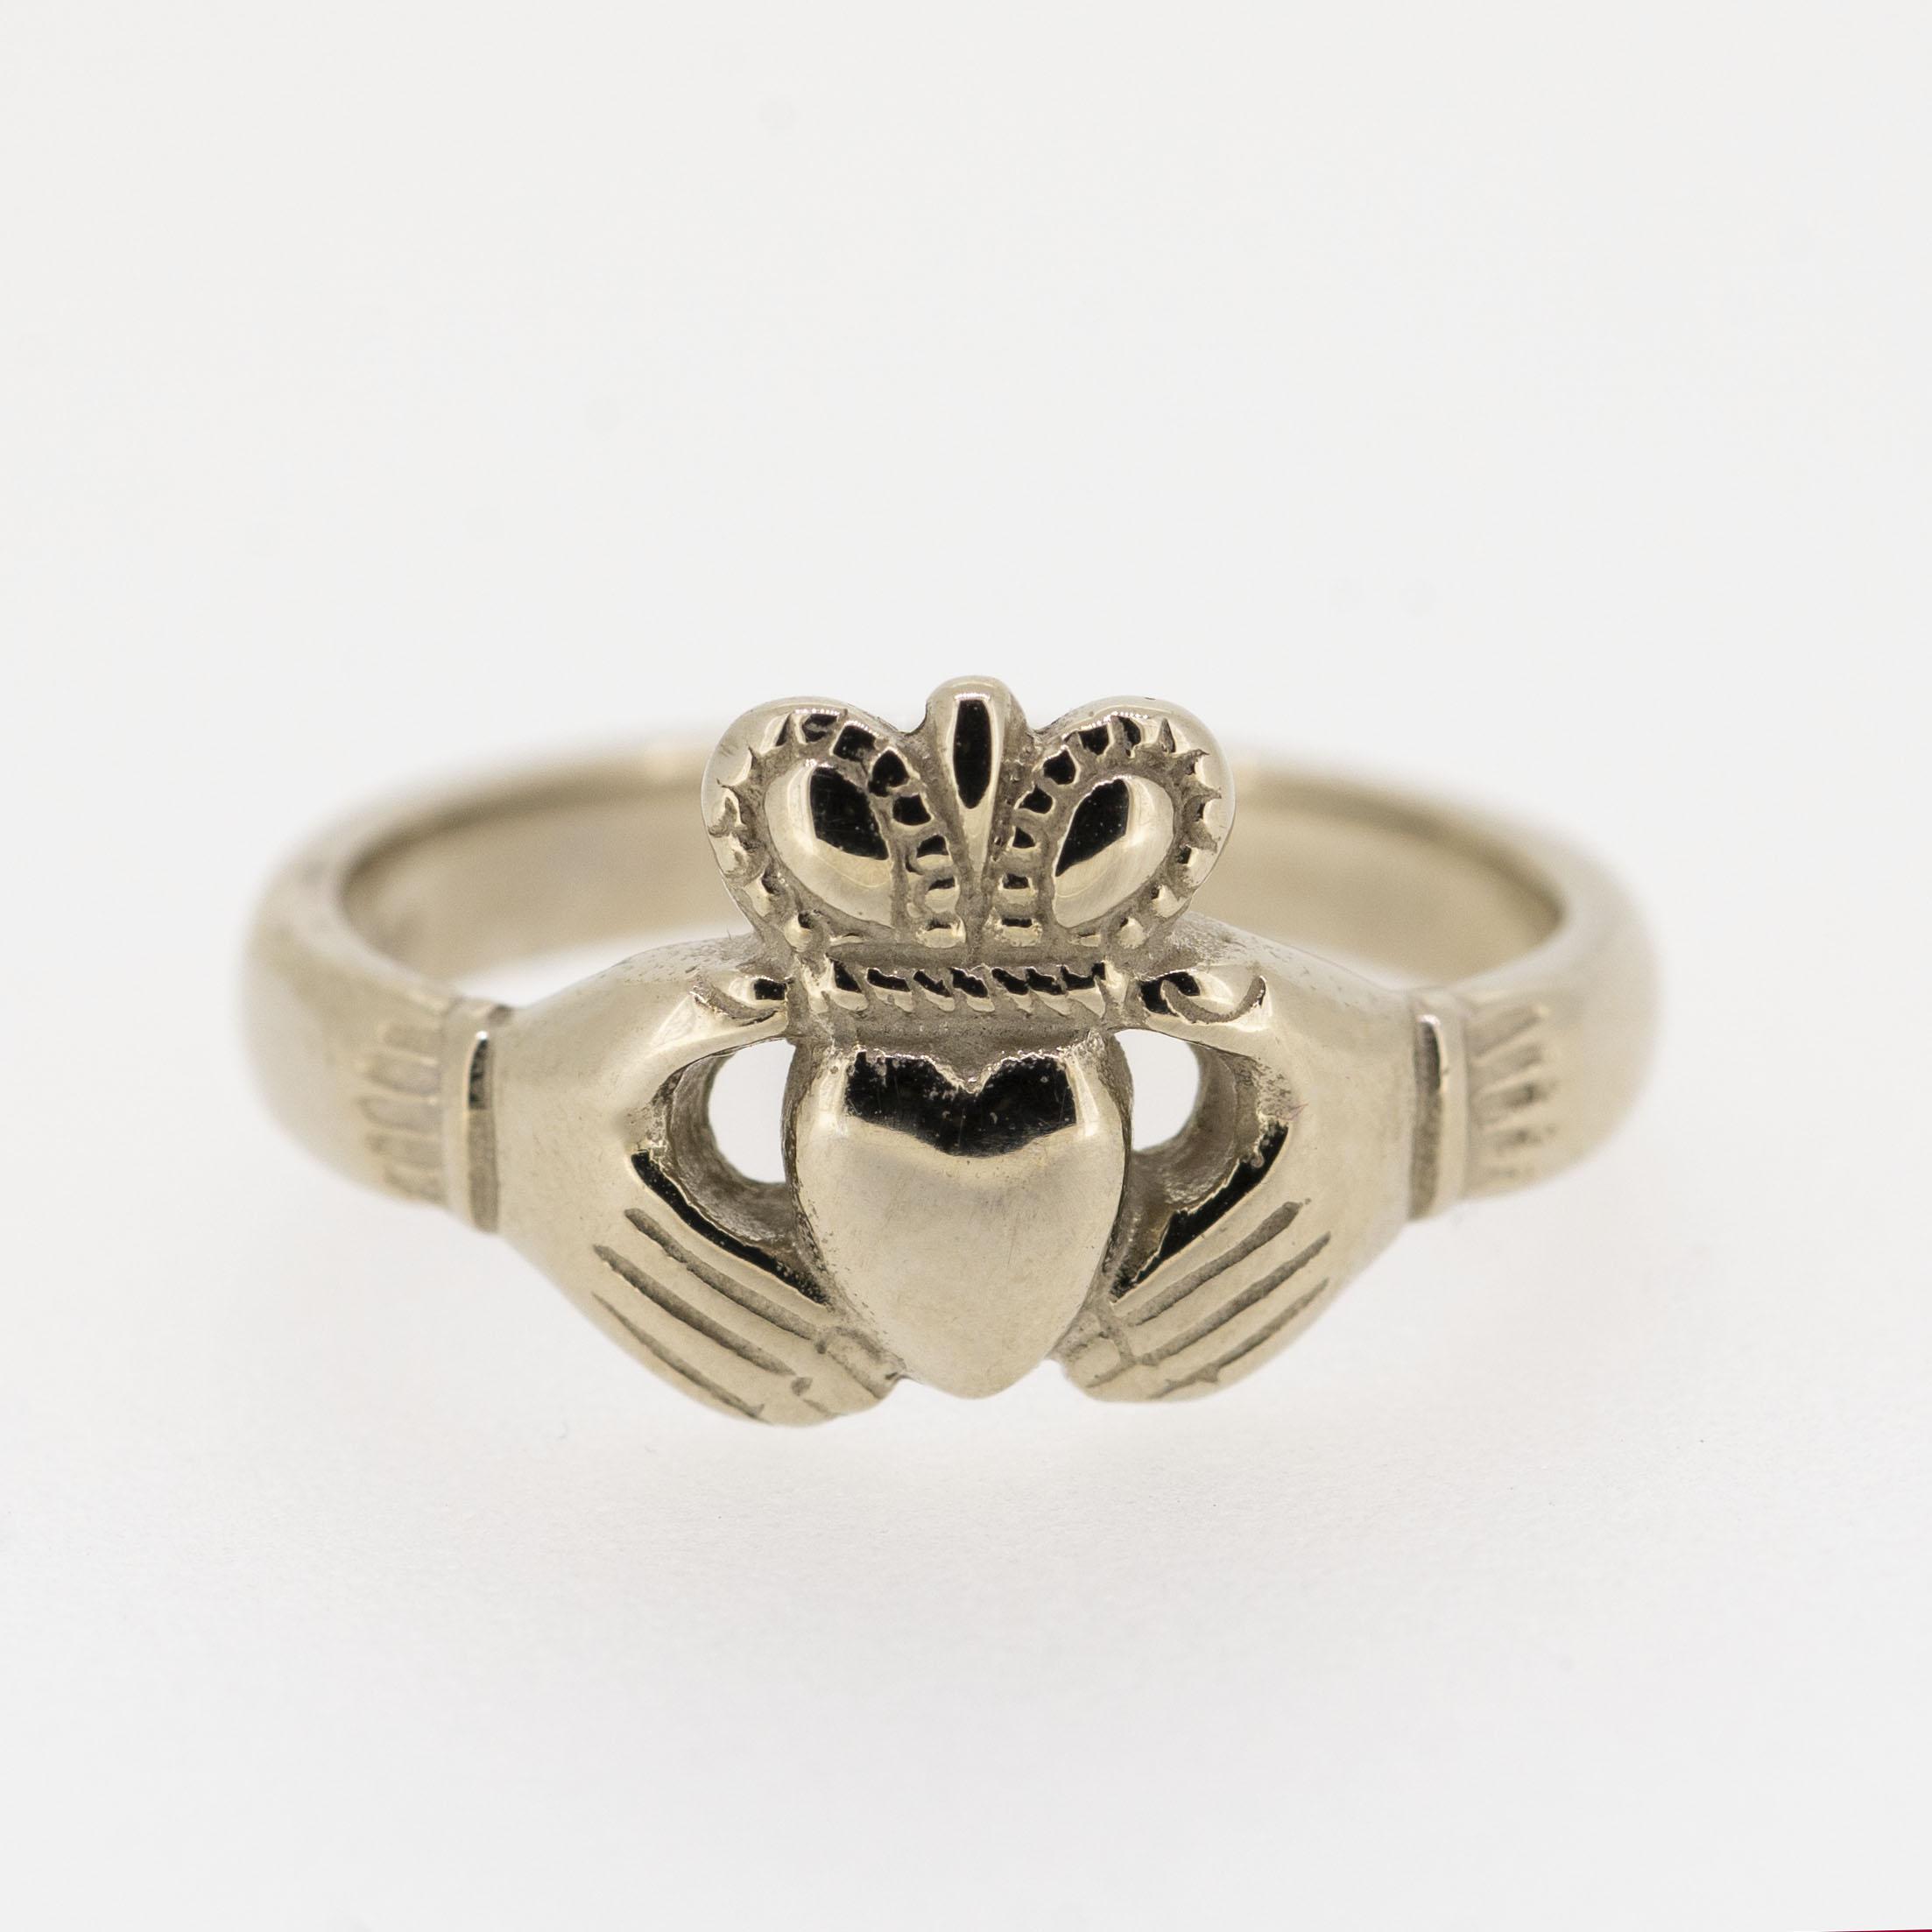 The Claddagh Ring: Meaning, How to Wear, and Irish Charm | TikTok